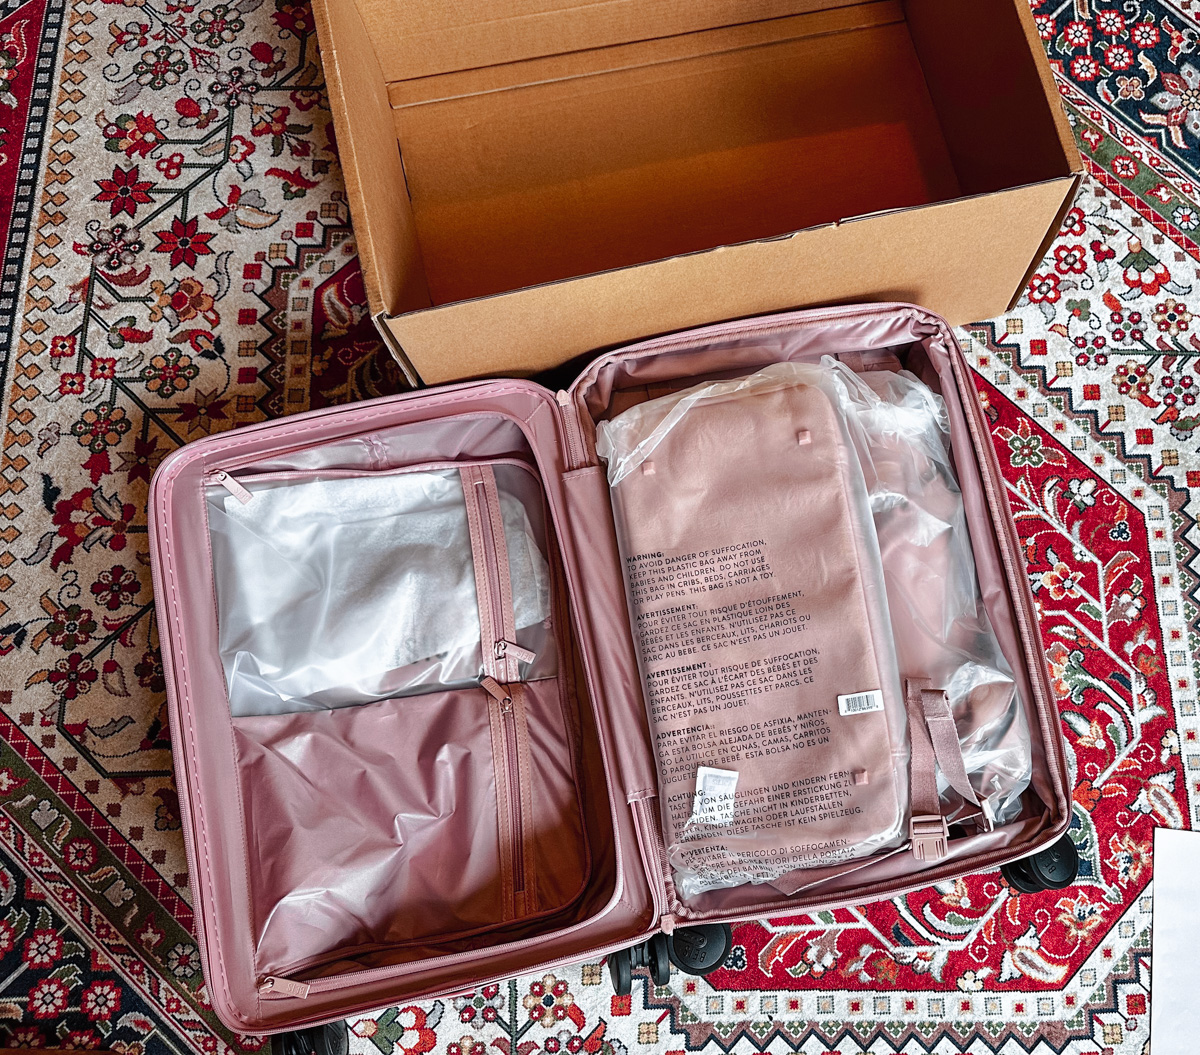 A new pink Beis suitcase laying open  on an oriental rug, with the carboard box it came in visible in the background. 